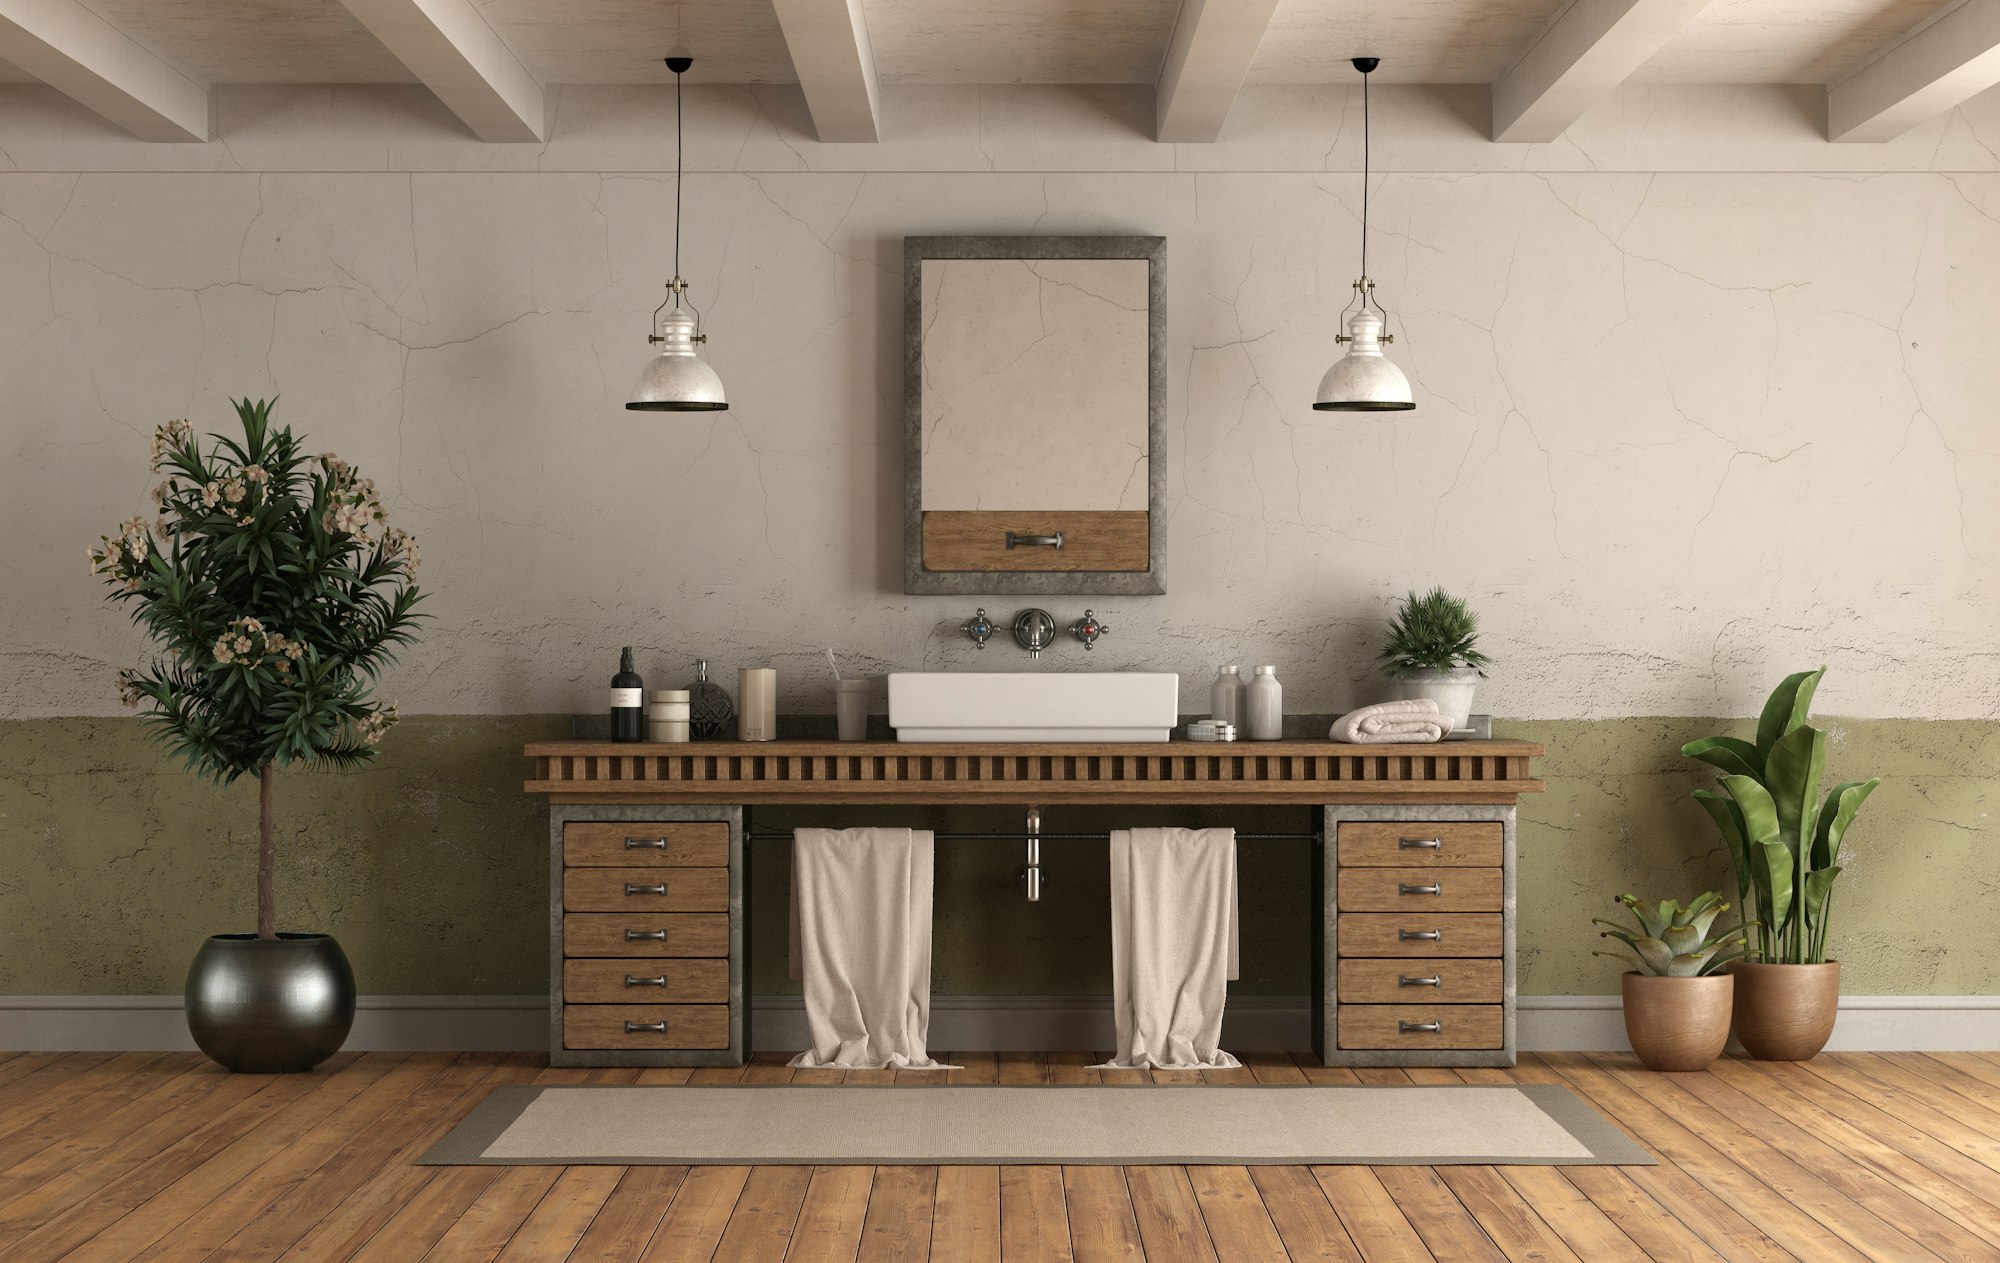 Retro style home bathroom with sink